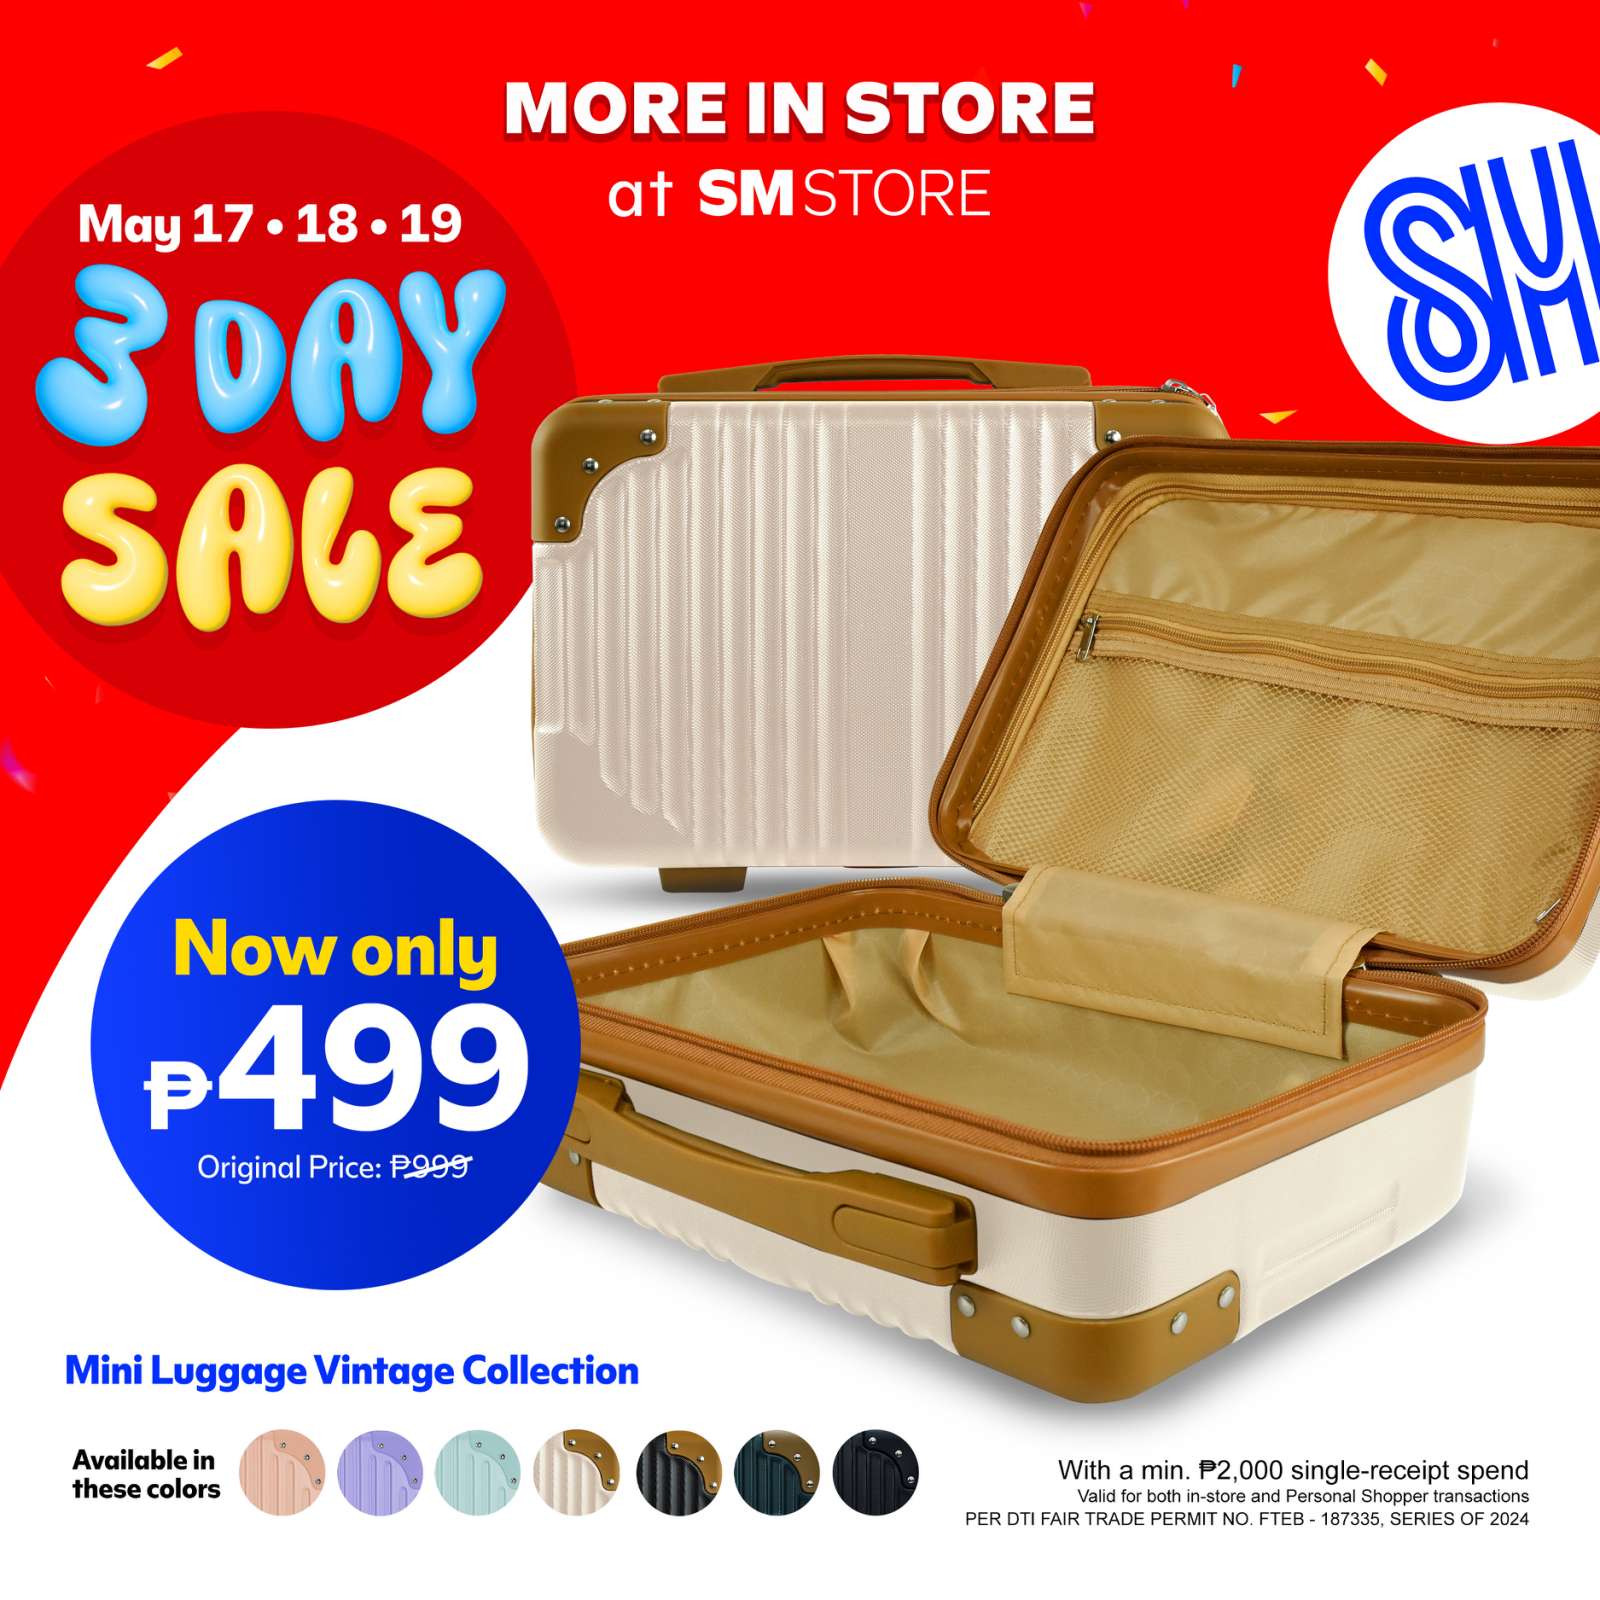 3 day sale pwp deals mini luggage